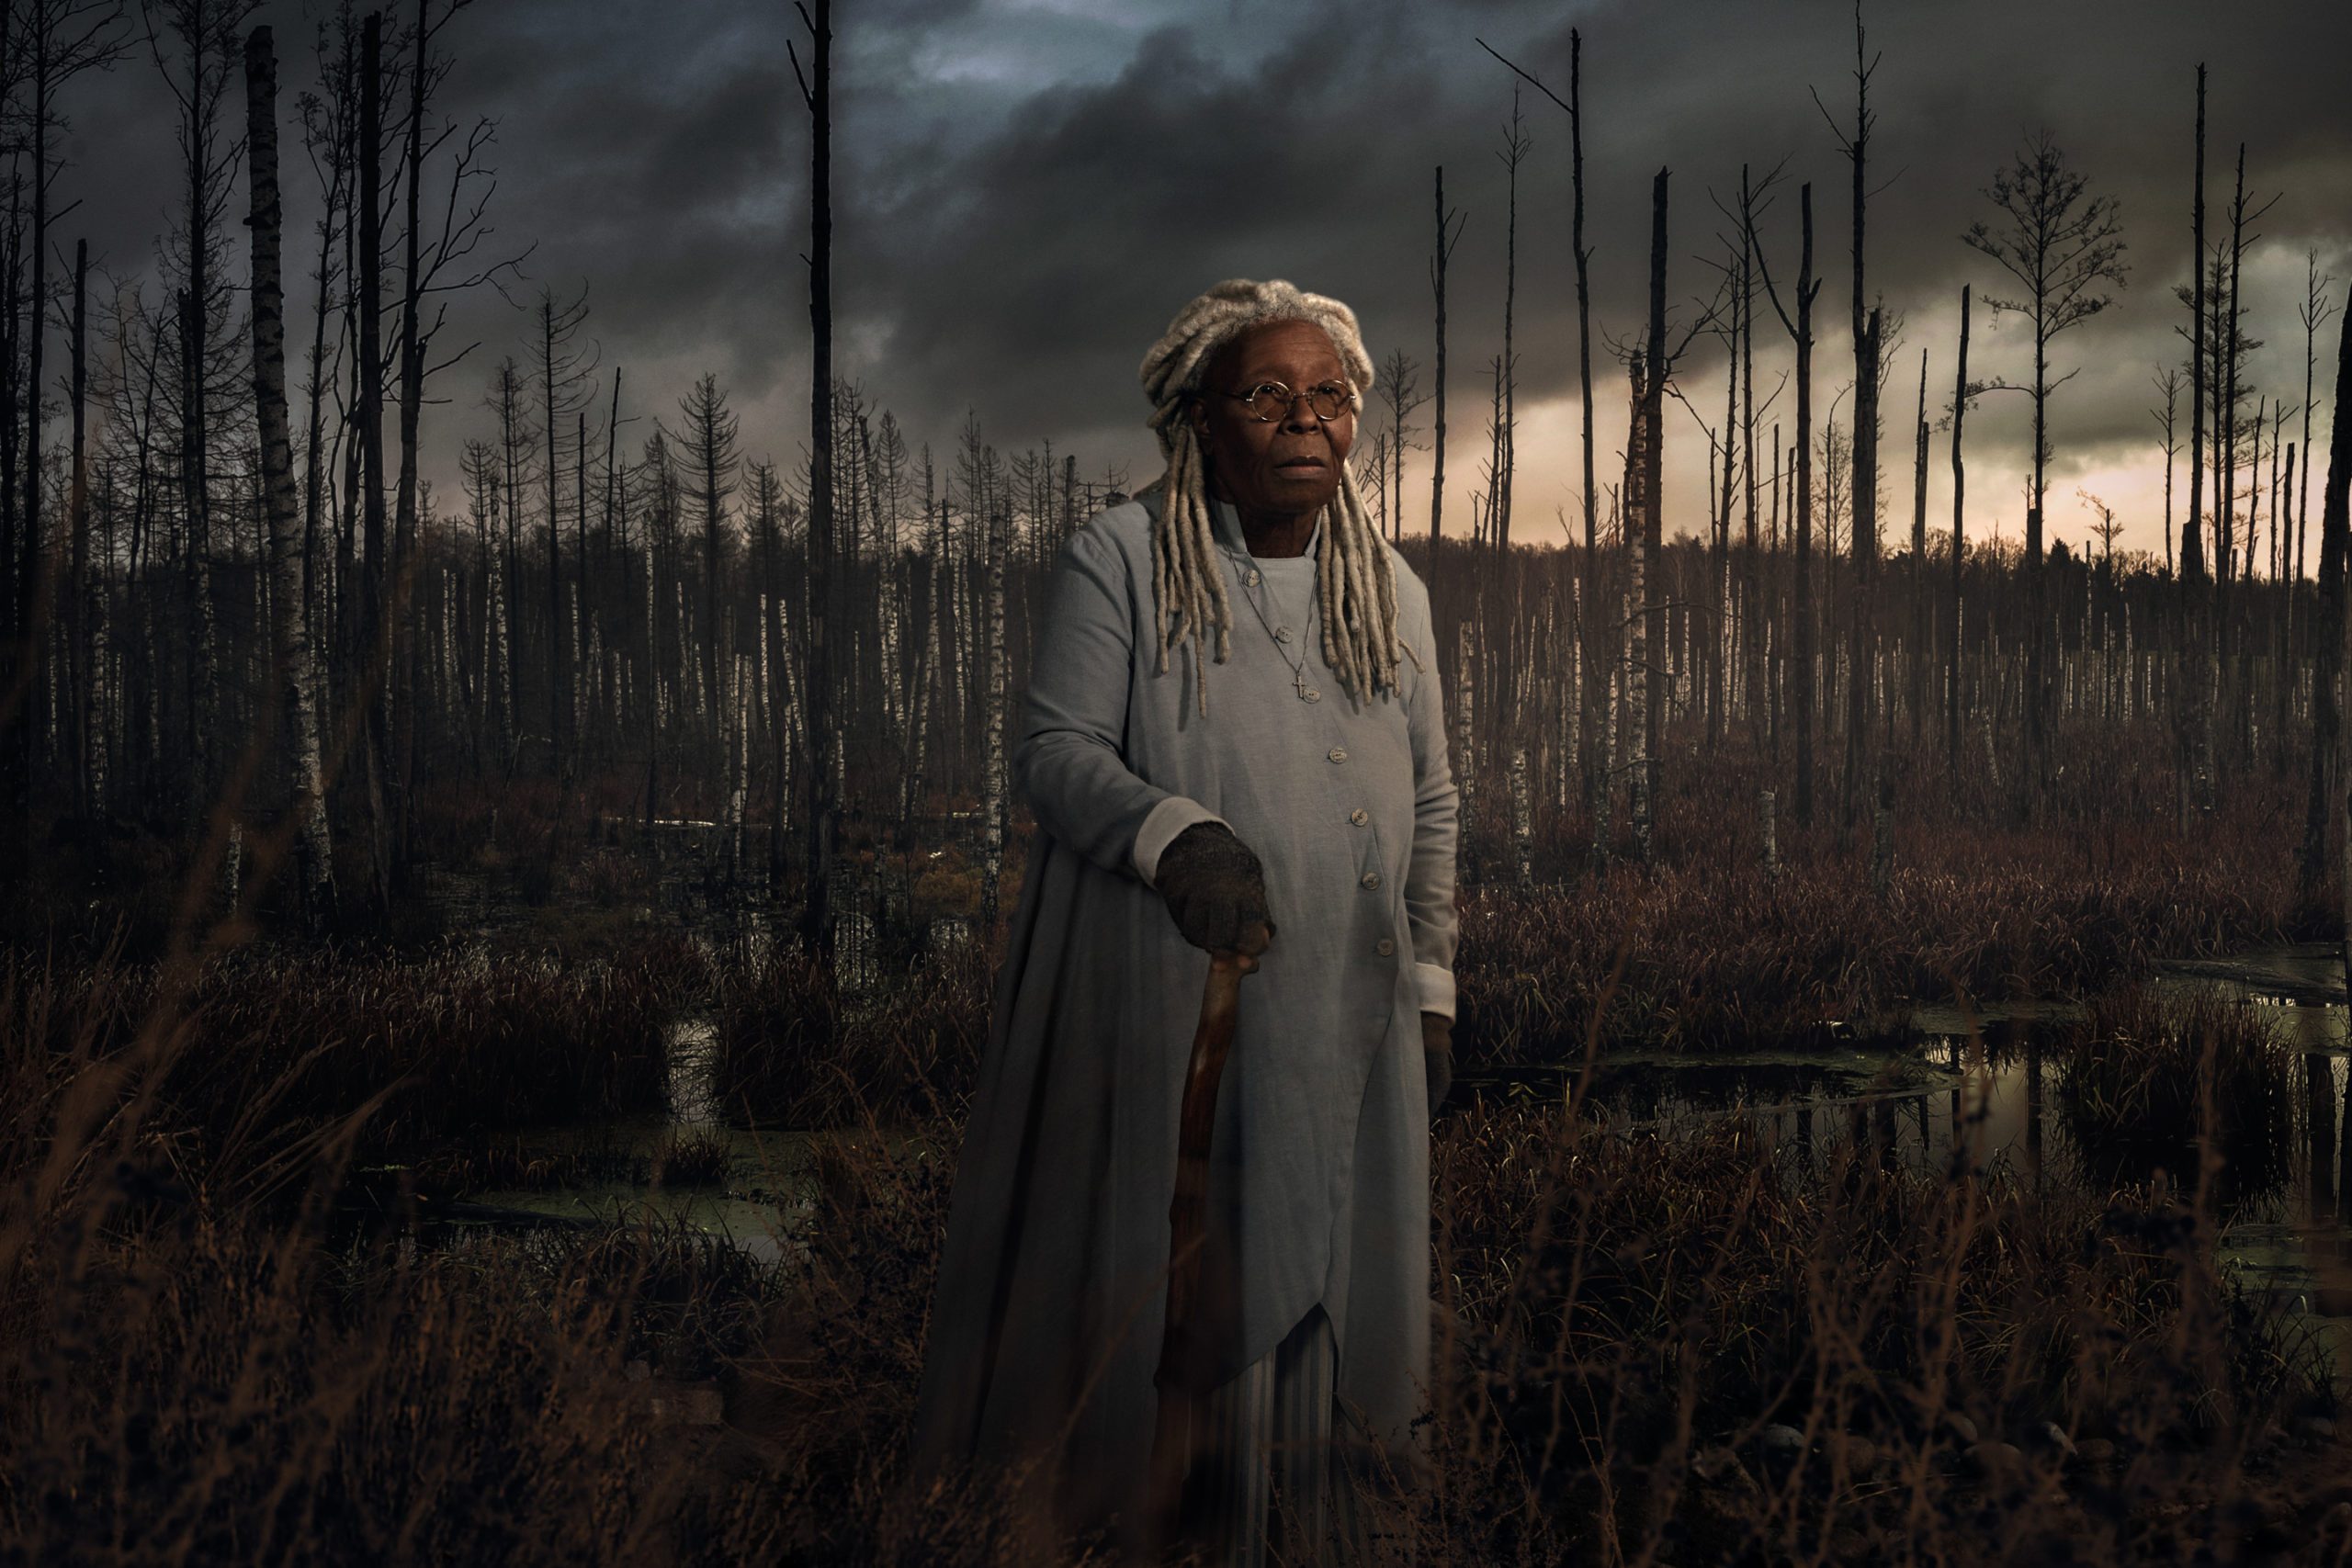 Whoopi Goldberg as Mother Abigail&nbsp;in a burnt up forest in The Stand